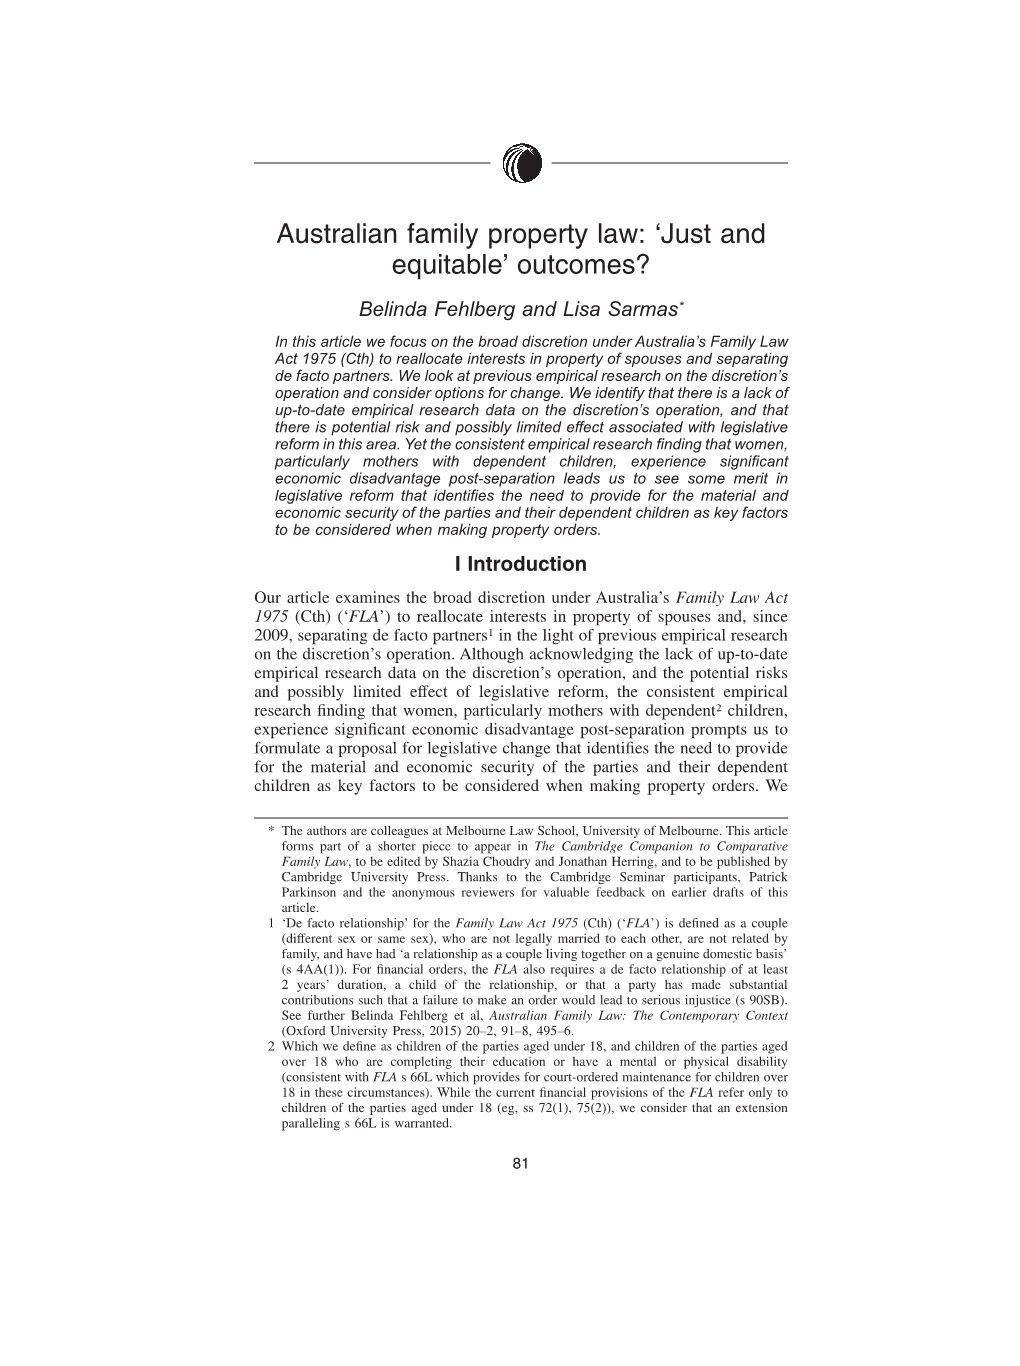 Australian Family Property Law: 'Just and Equitable' Outcomes?